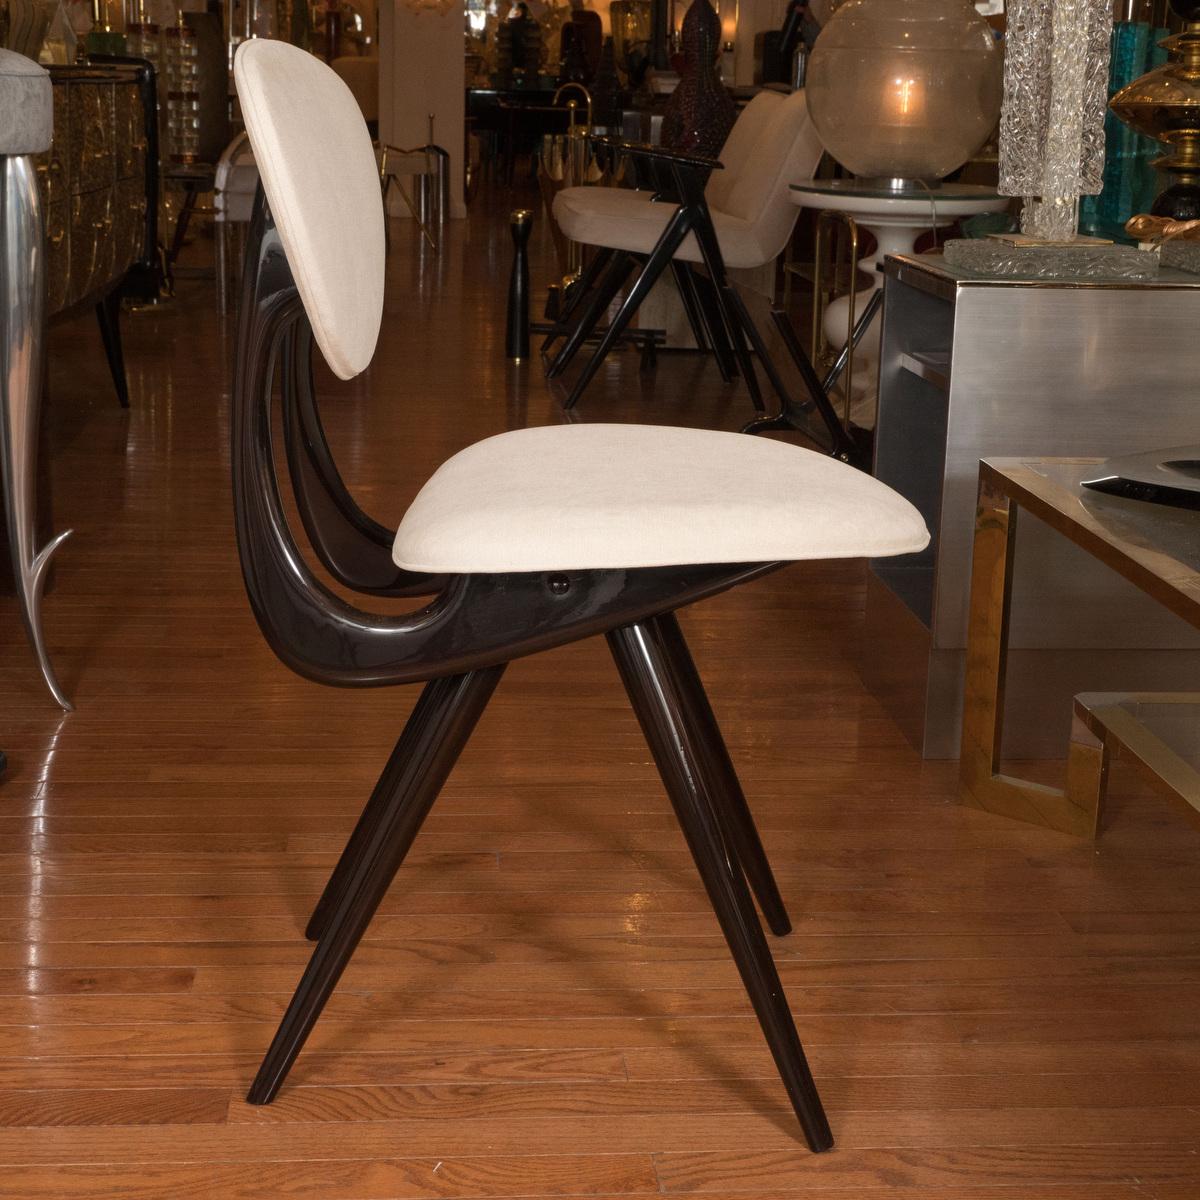 Mid-Century Modern Stylized Lacquered Wood Chairs